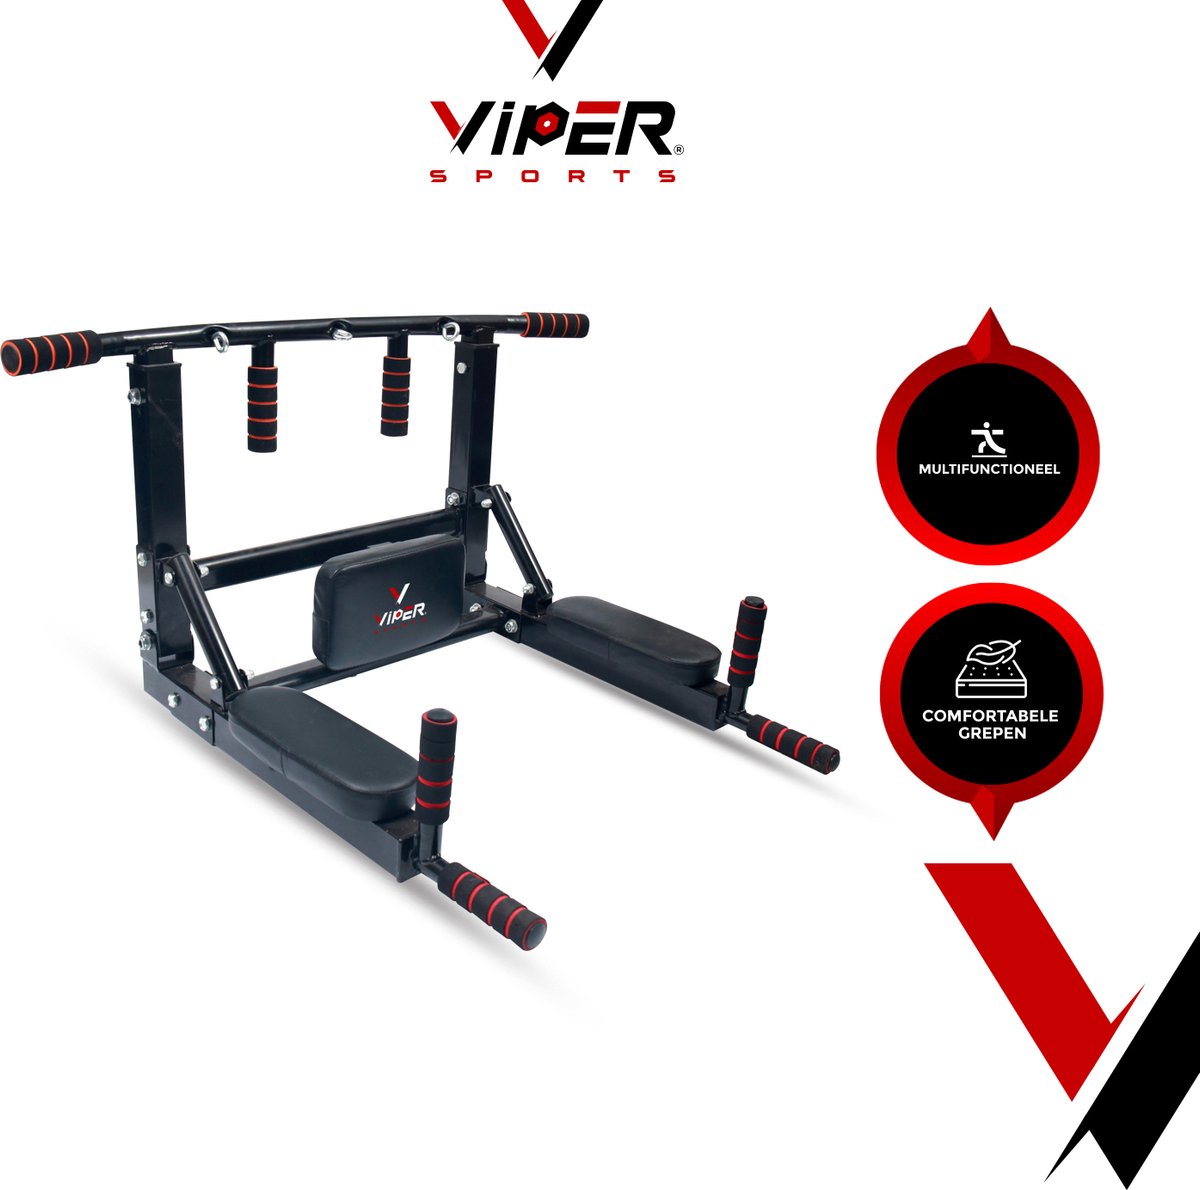 Viper Sports PullPower - Pull Up Bar - Pull-up bar - Back & Arm Cushion - Anti-slip - Up to 120 kg - Metal - Black/Red